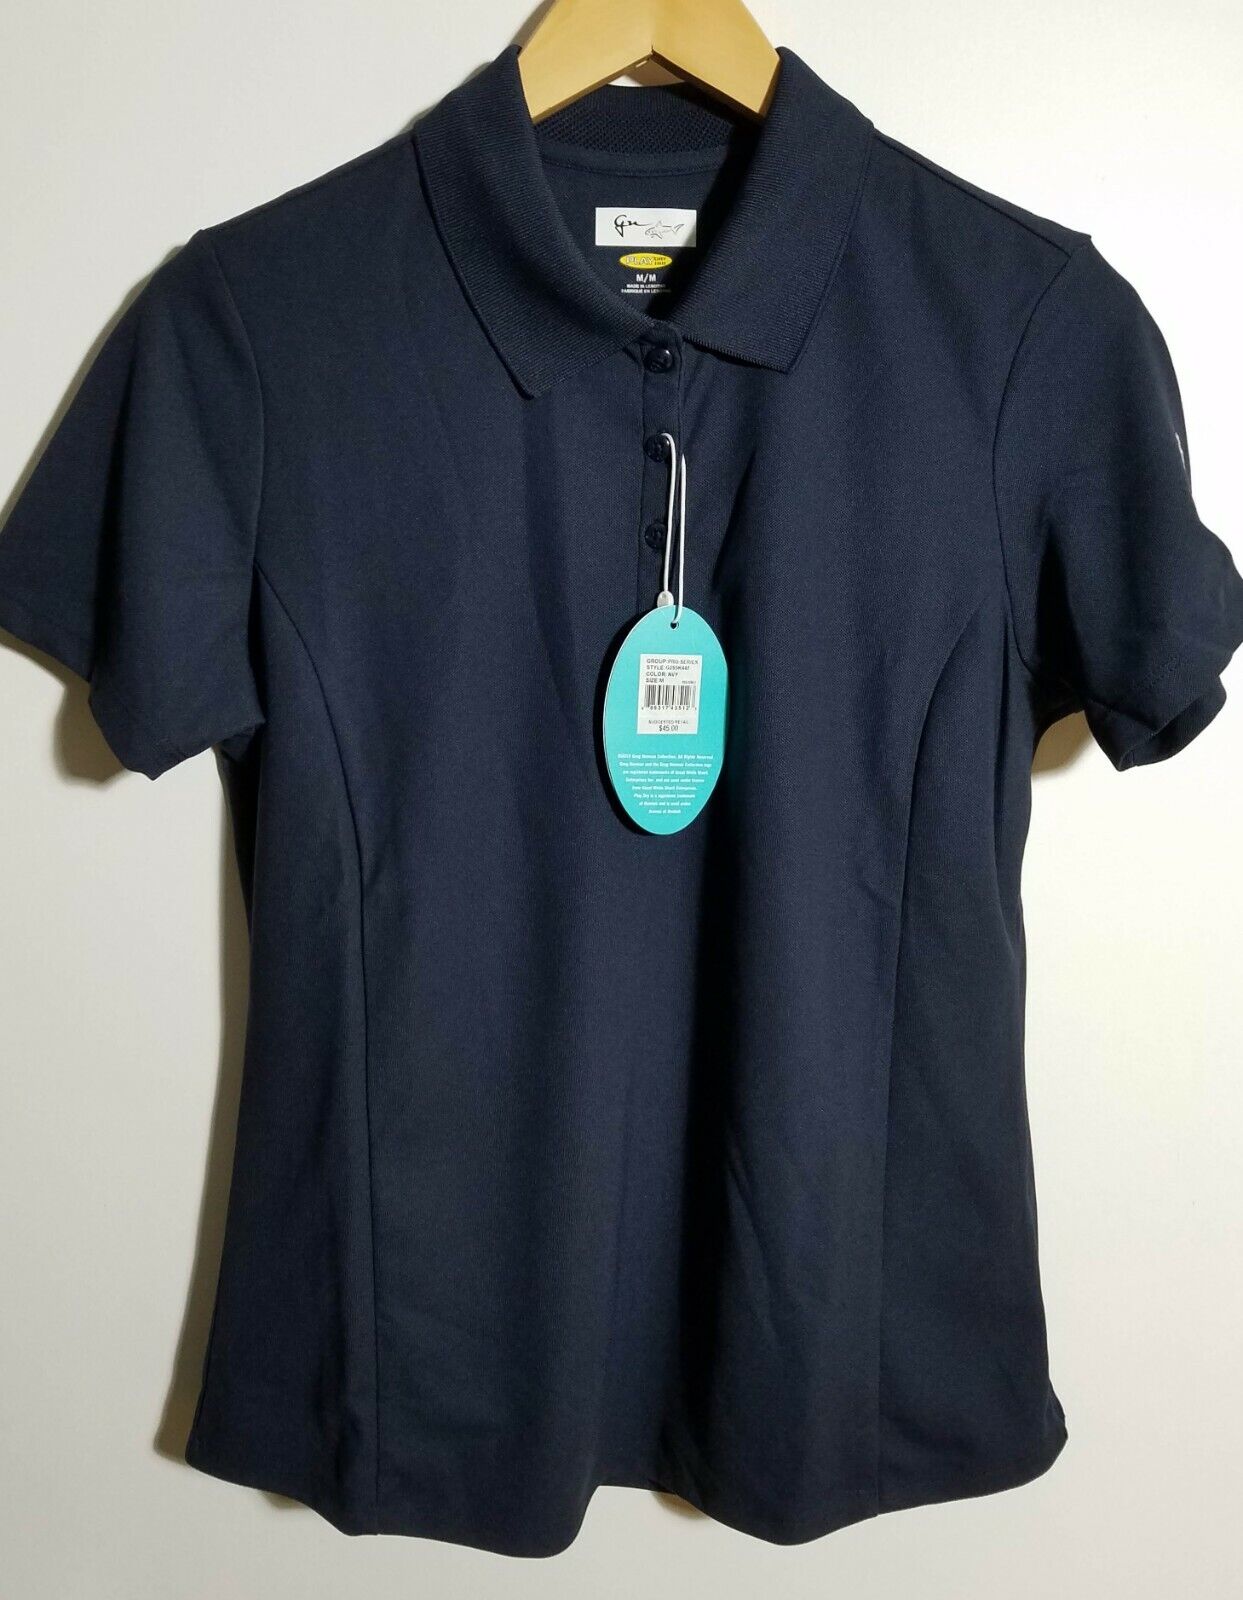 1 NWT GREG NORMAN New products world's highest quality popular WOMEN'S POLO COLOR: NAVY J200 MEDIUM SIZE: Sales results No. 1